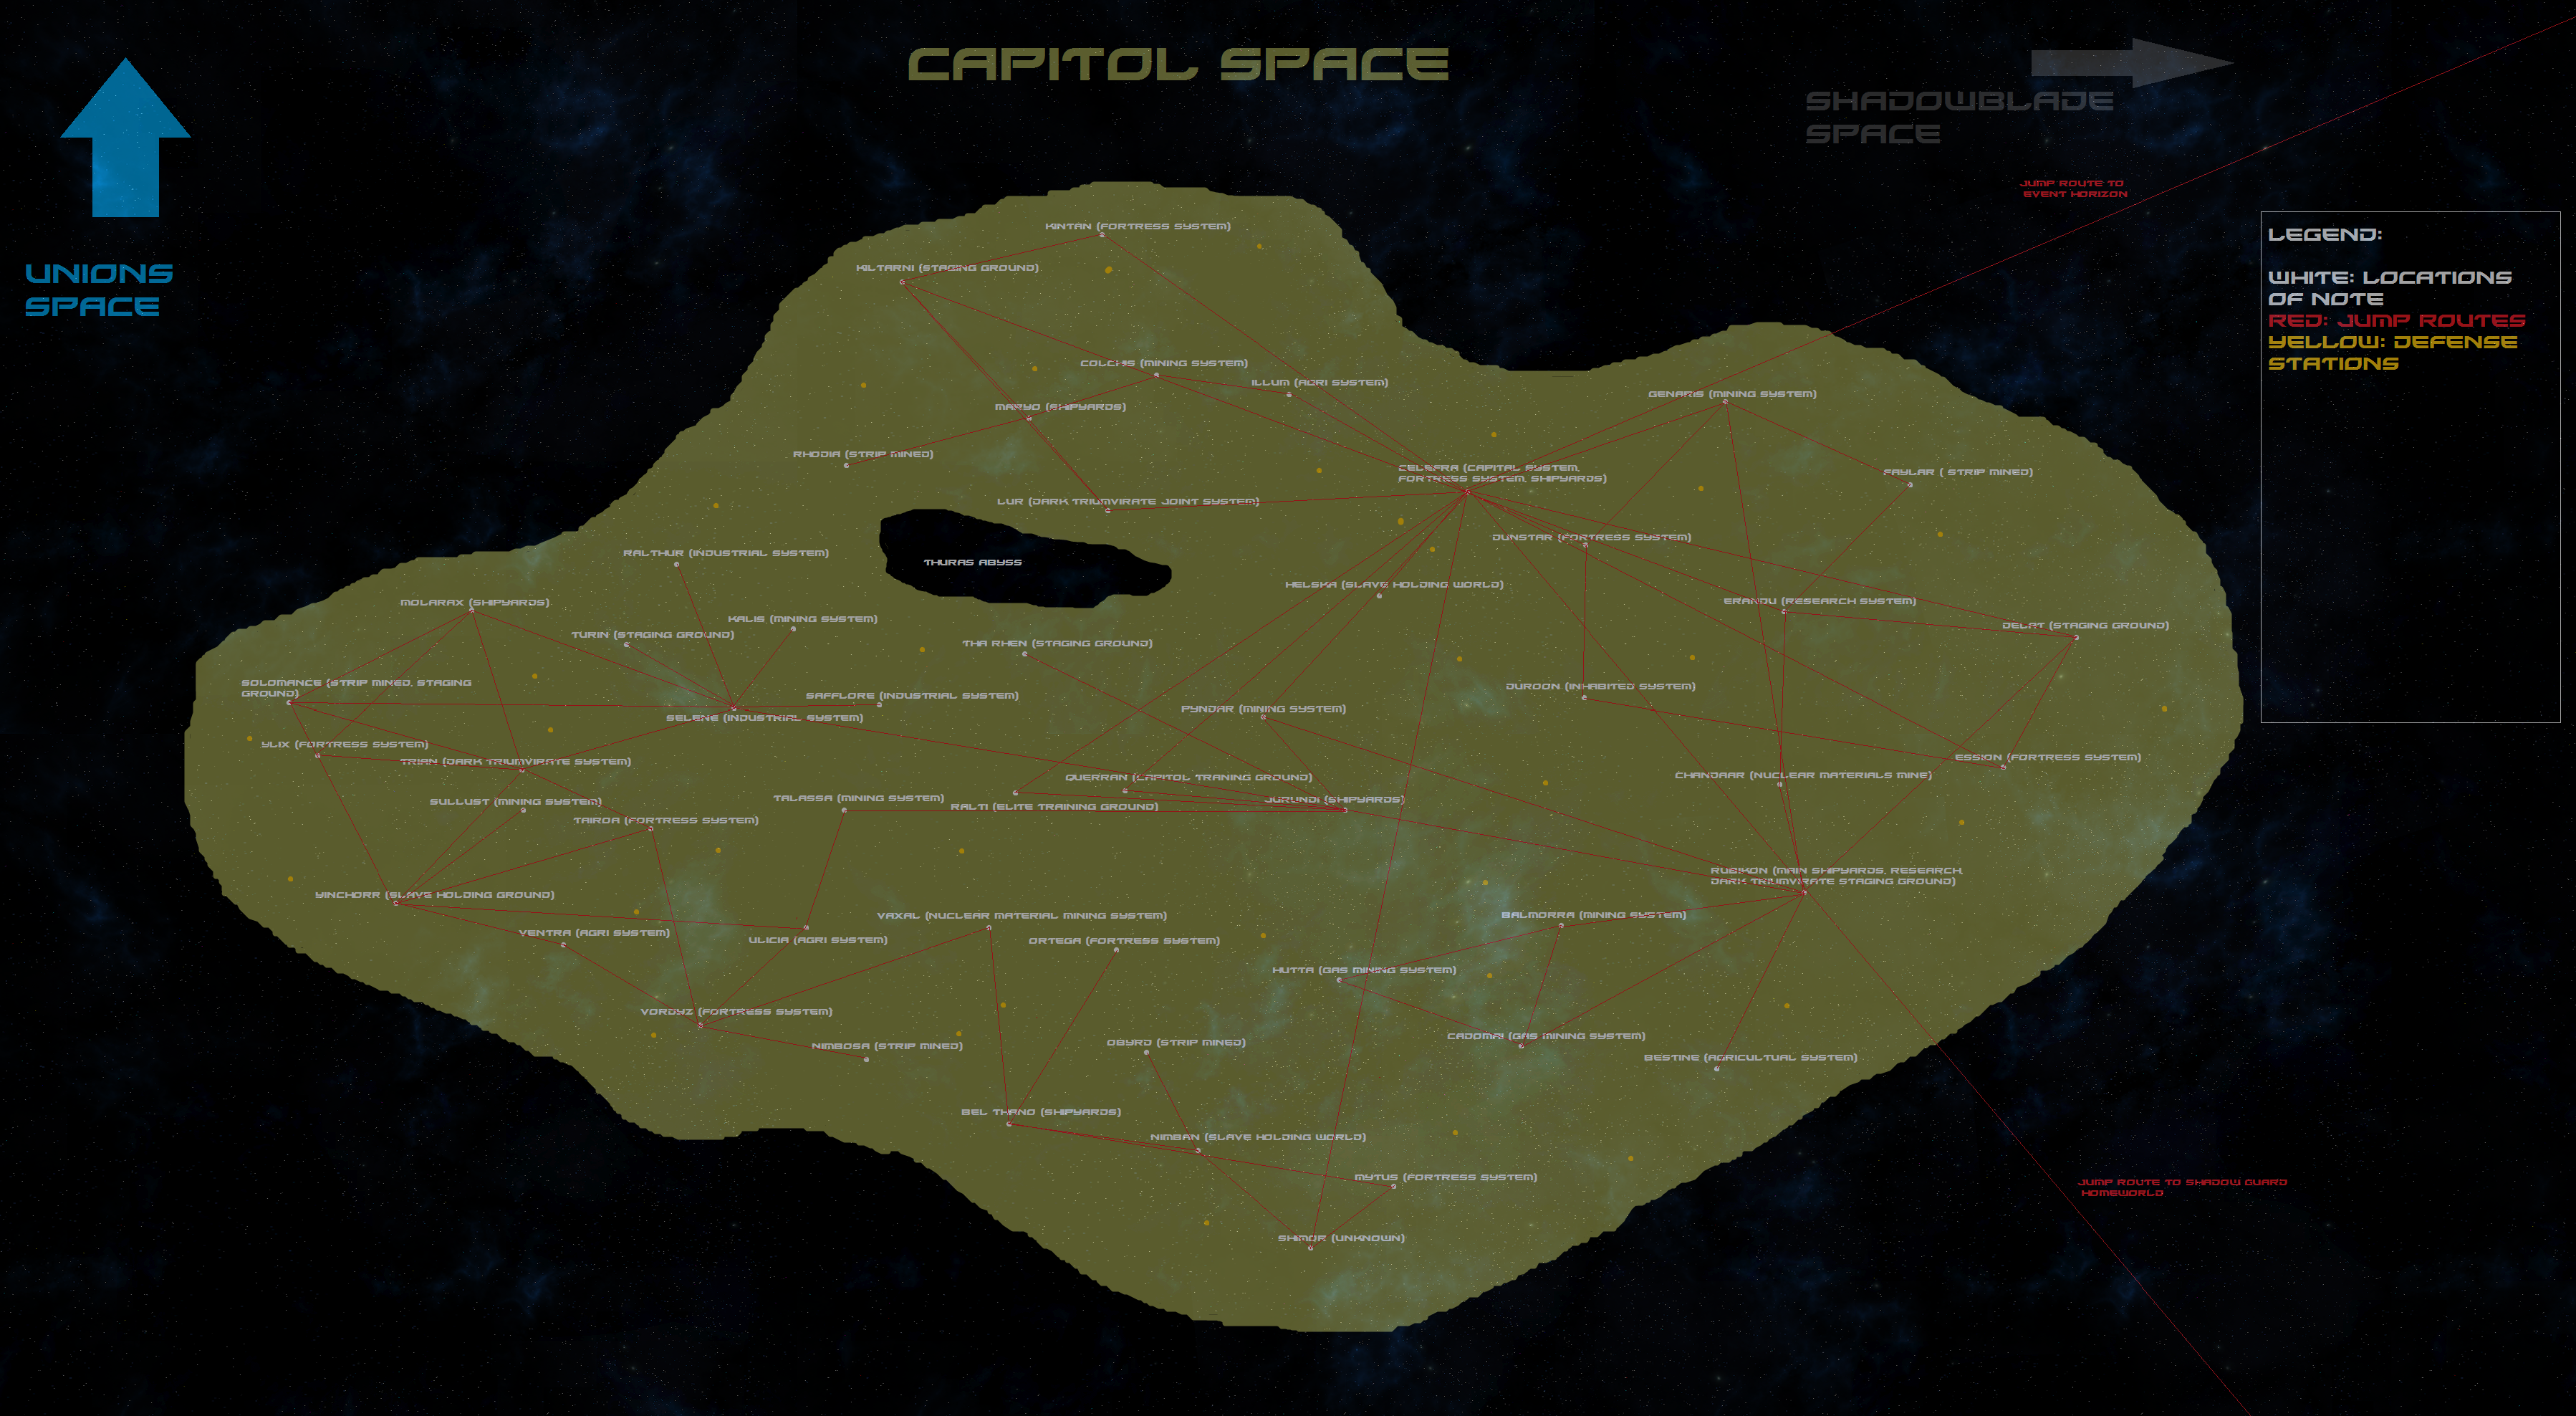 Capitol space map